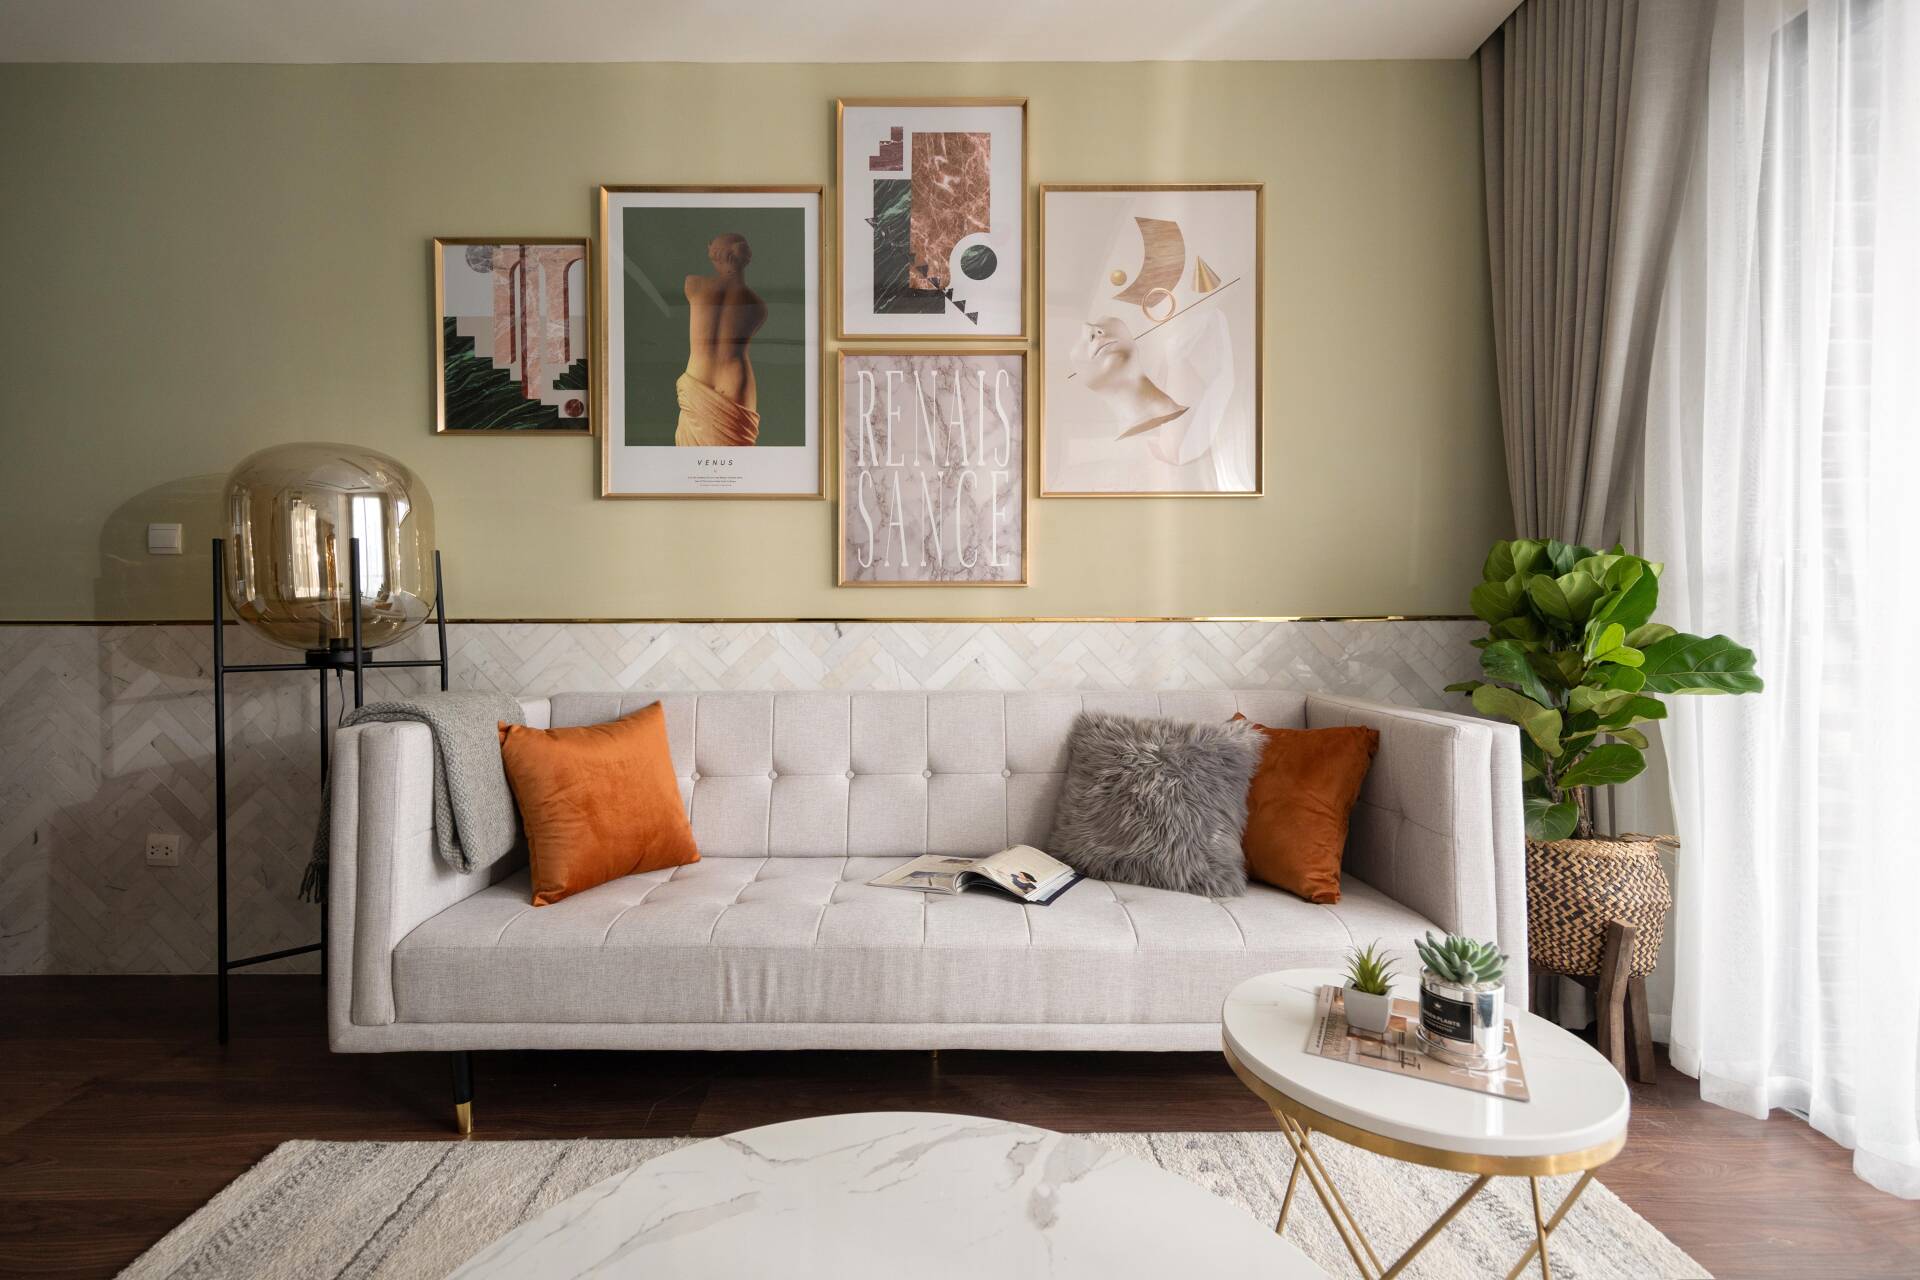 The cream fabric sofa is adorned with small orange and gray pillows that are very harmonious.